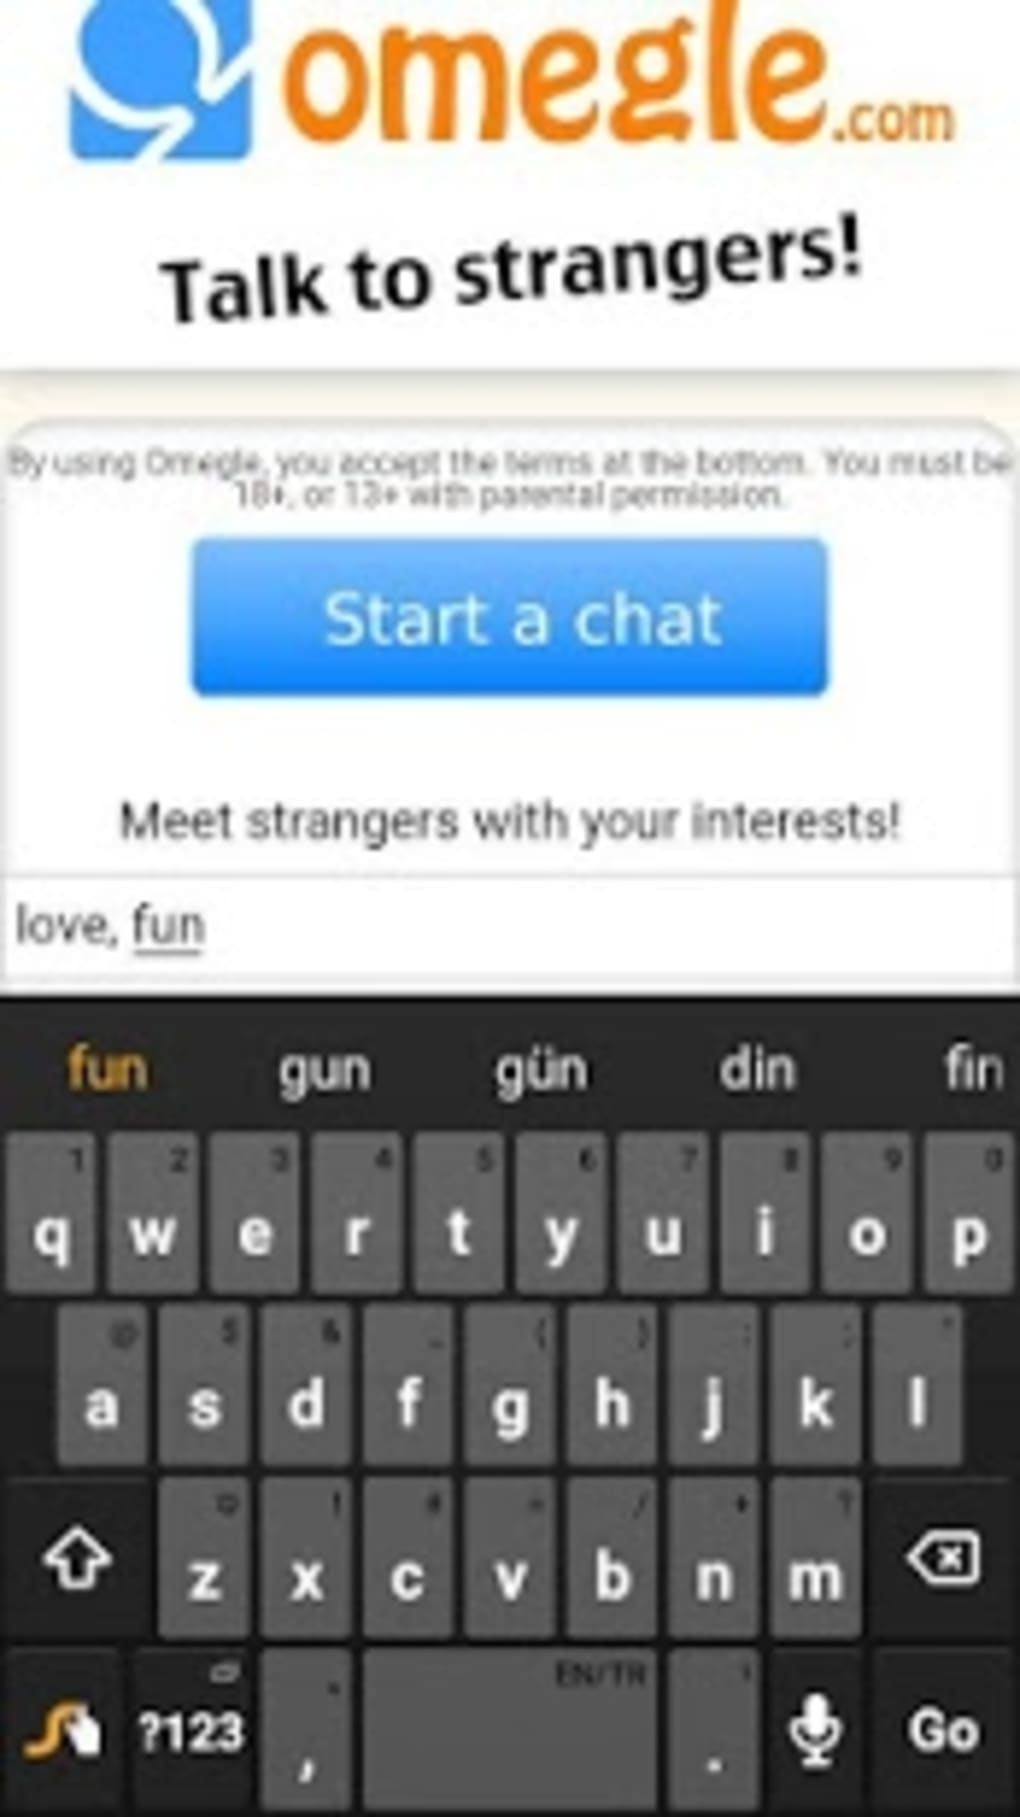 Chat apk omegle Download Omegle